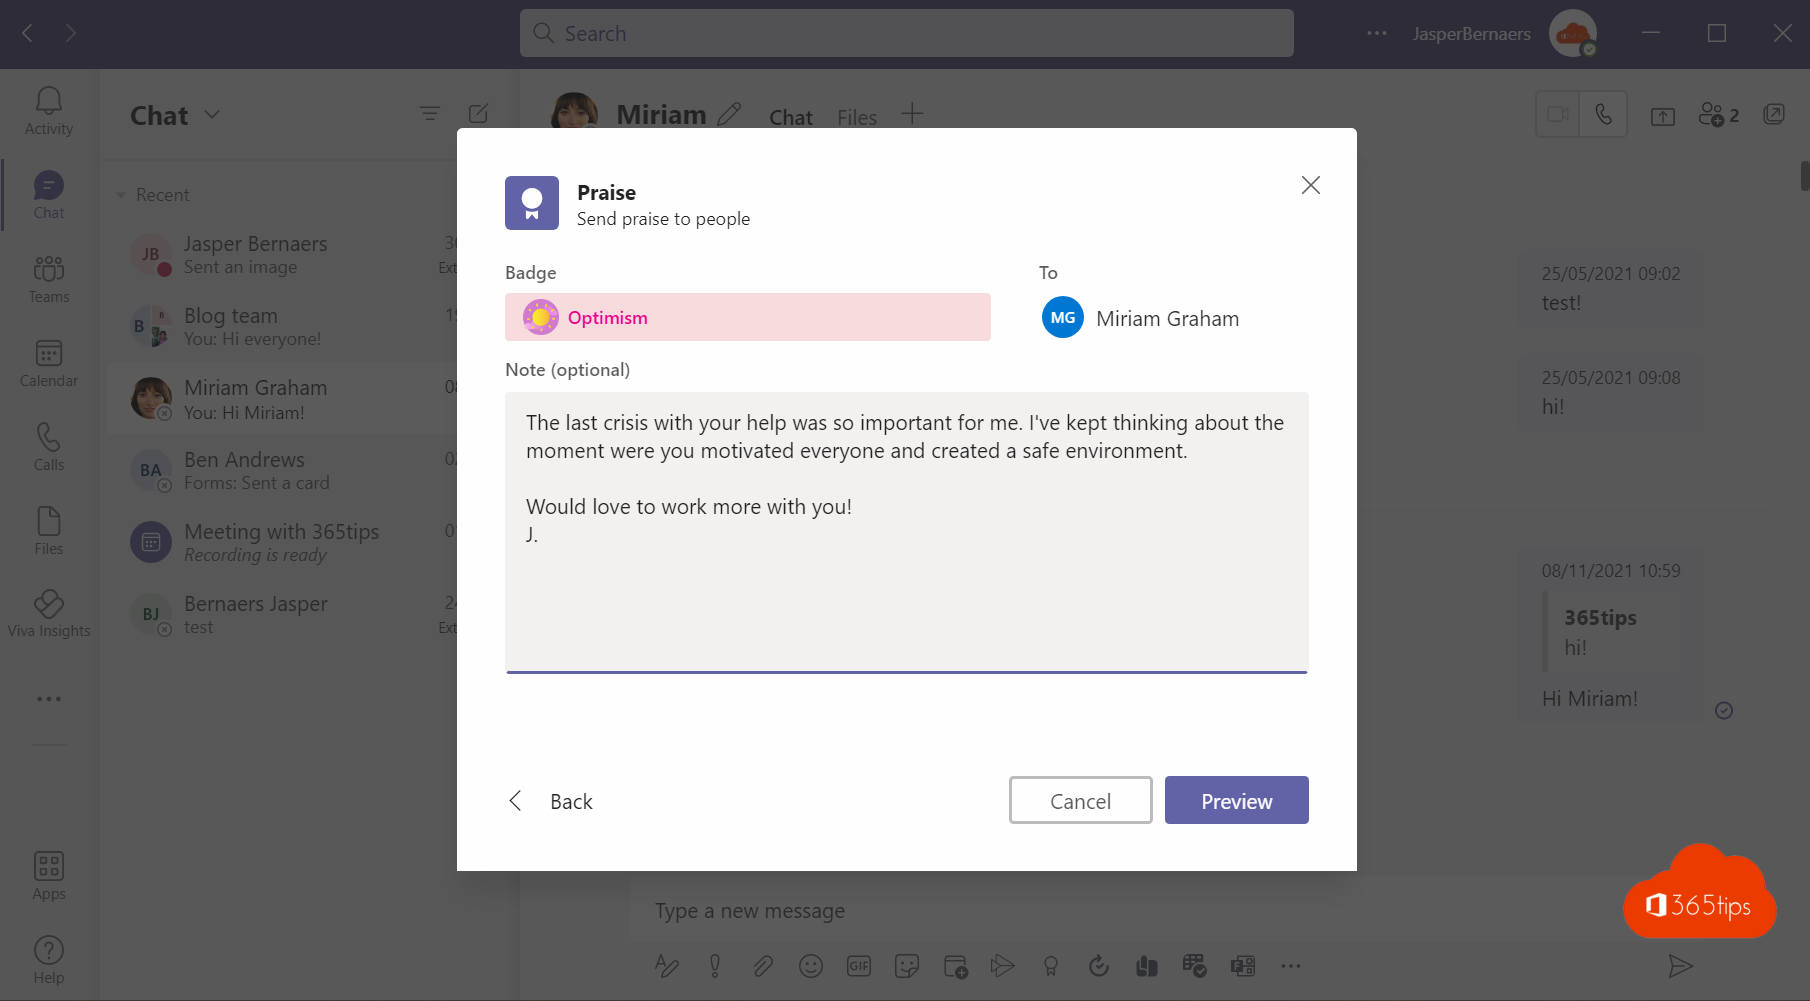 This is how to compliment (praise) a colleague in Microsoft Teams